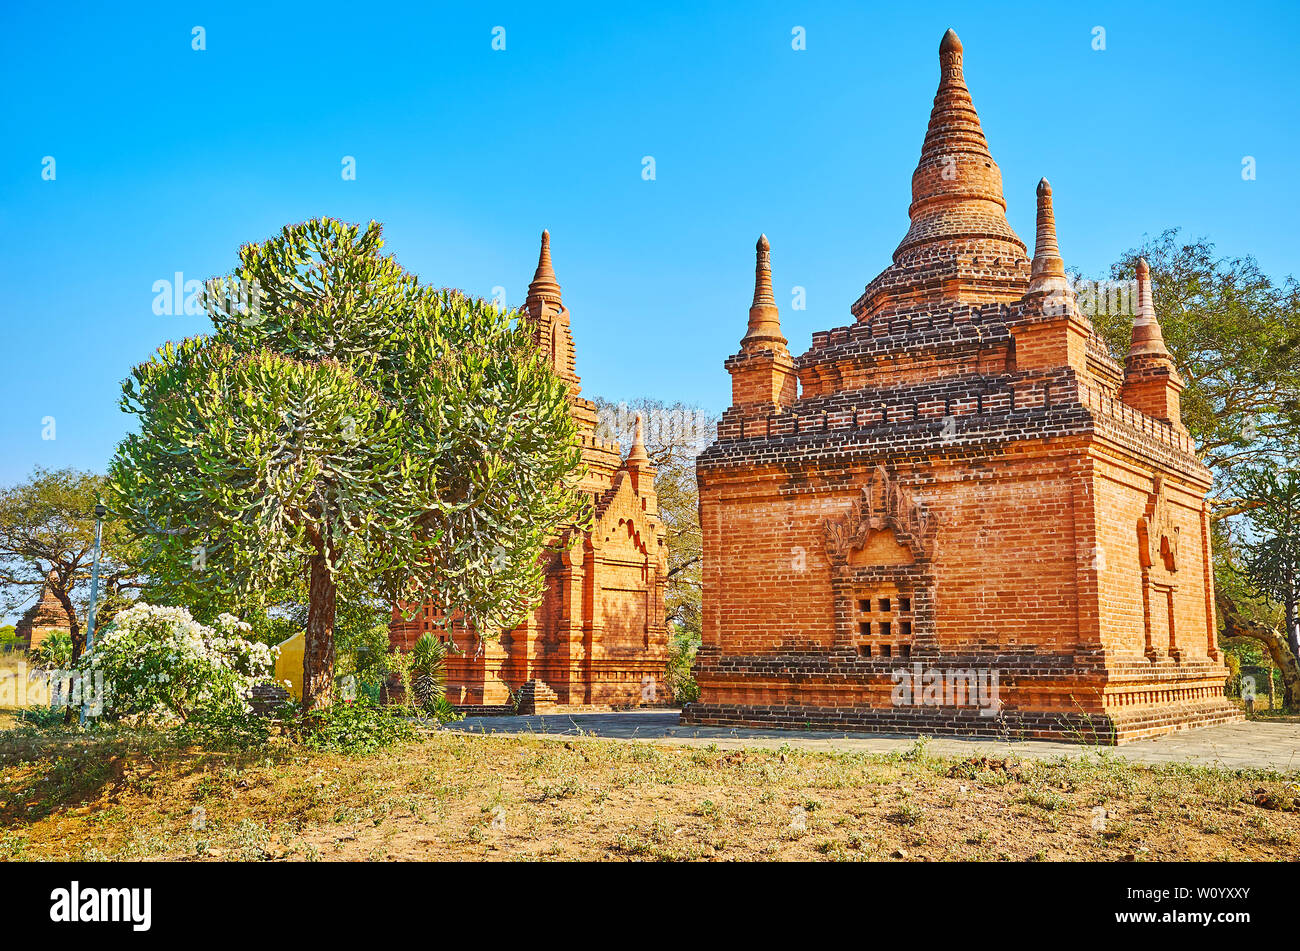 Bagan archaeological zone boasts unique ancient shrines and temples, preserved in tropical savannah landscape, Myanmar Stock Photo